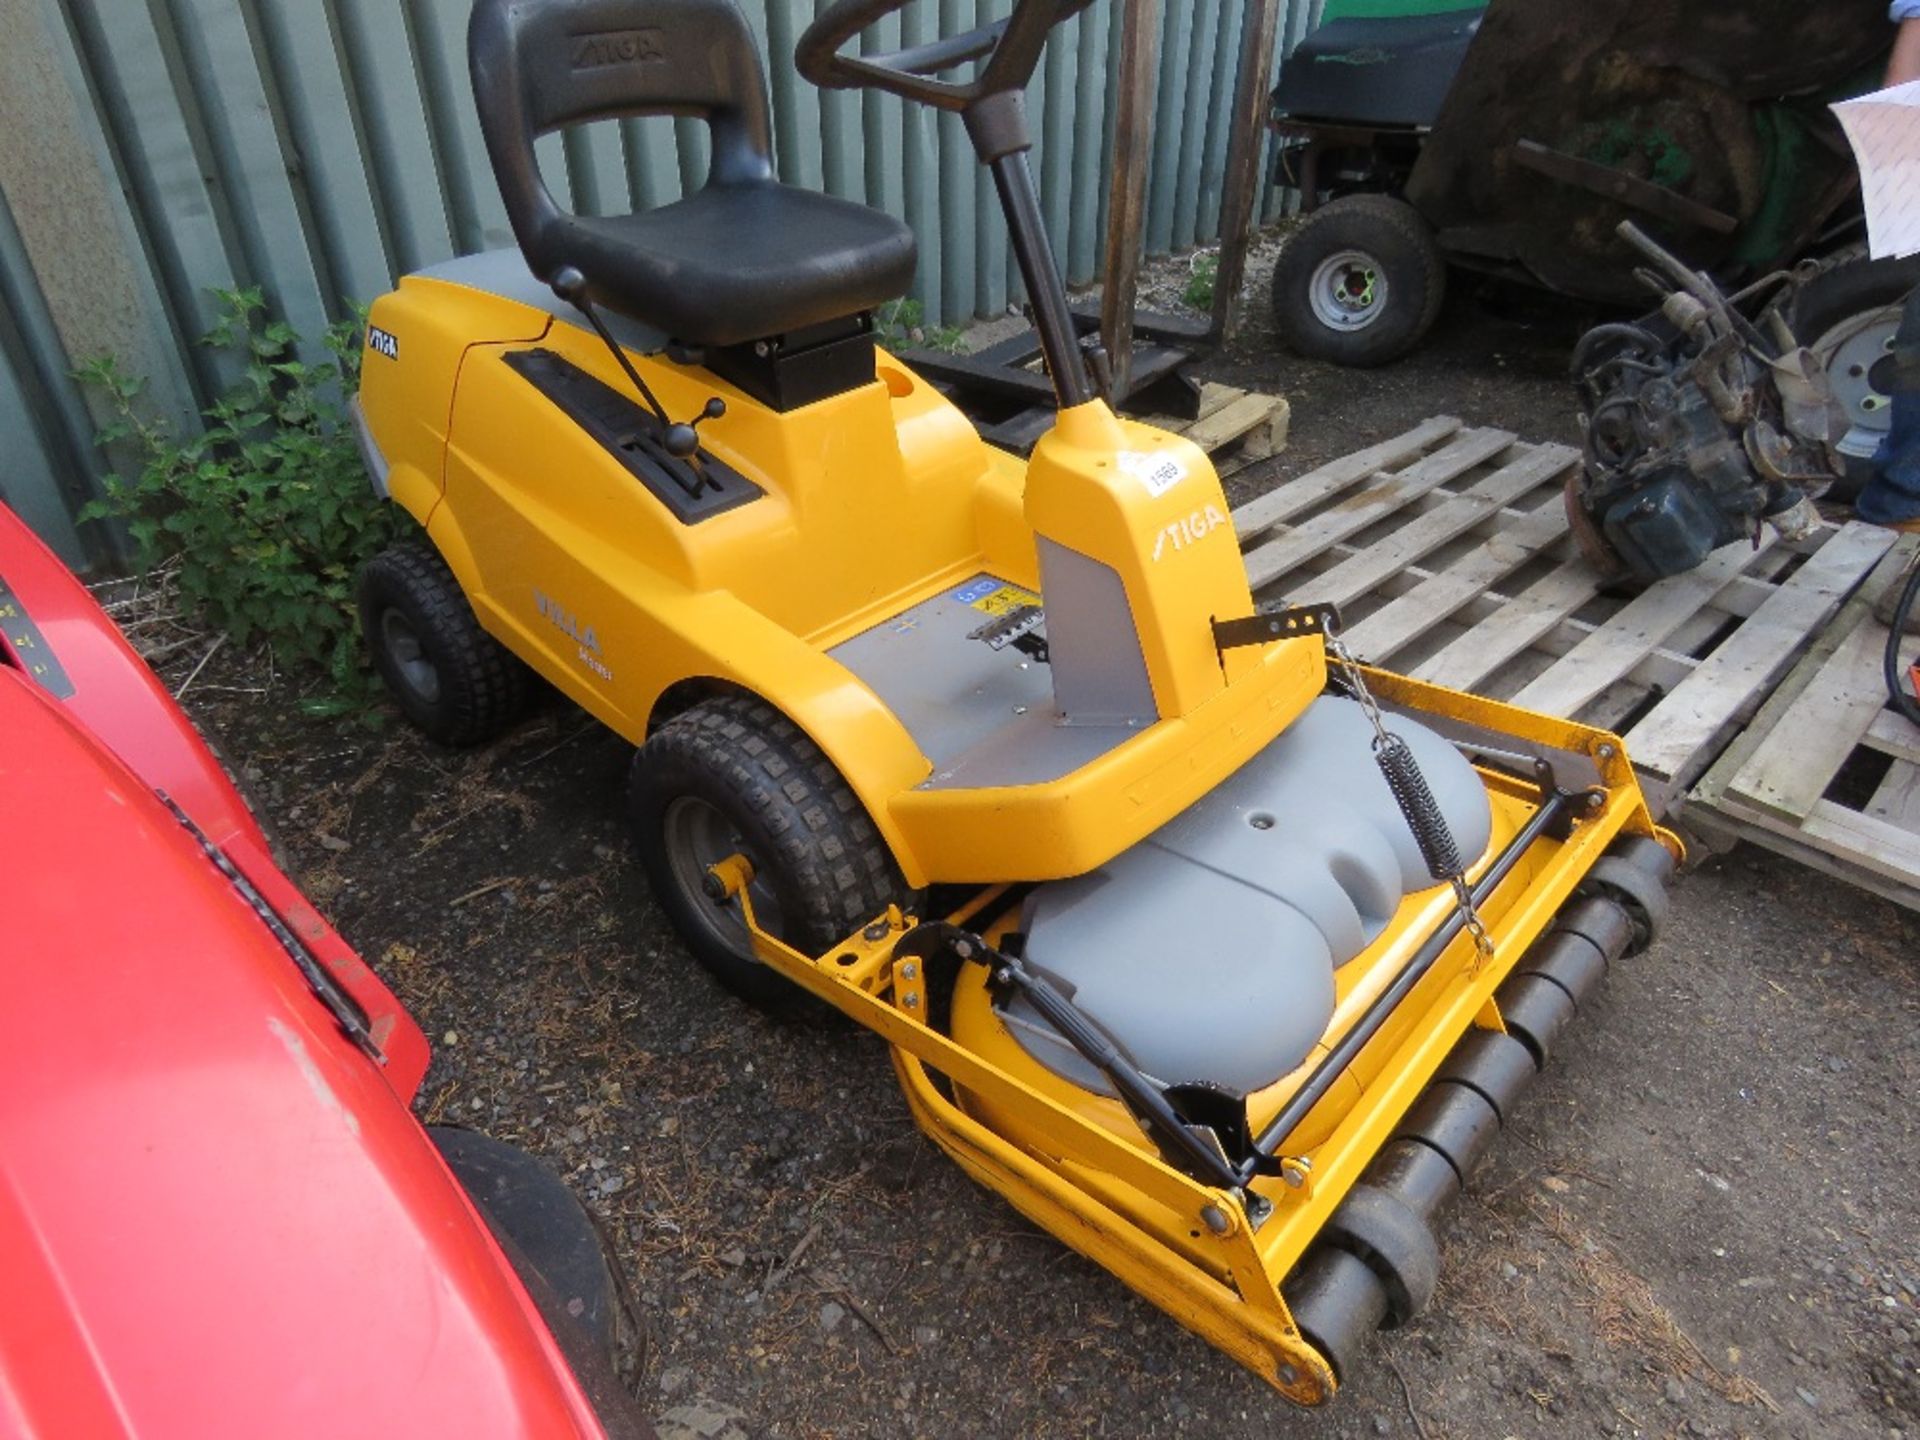 STIGA VILLA OUTFRONT RIDE ON MOWER (DECK NEEDS SOME PLATING) WHEN TESTED WAS SEEN TO DRIVE AND MOWE